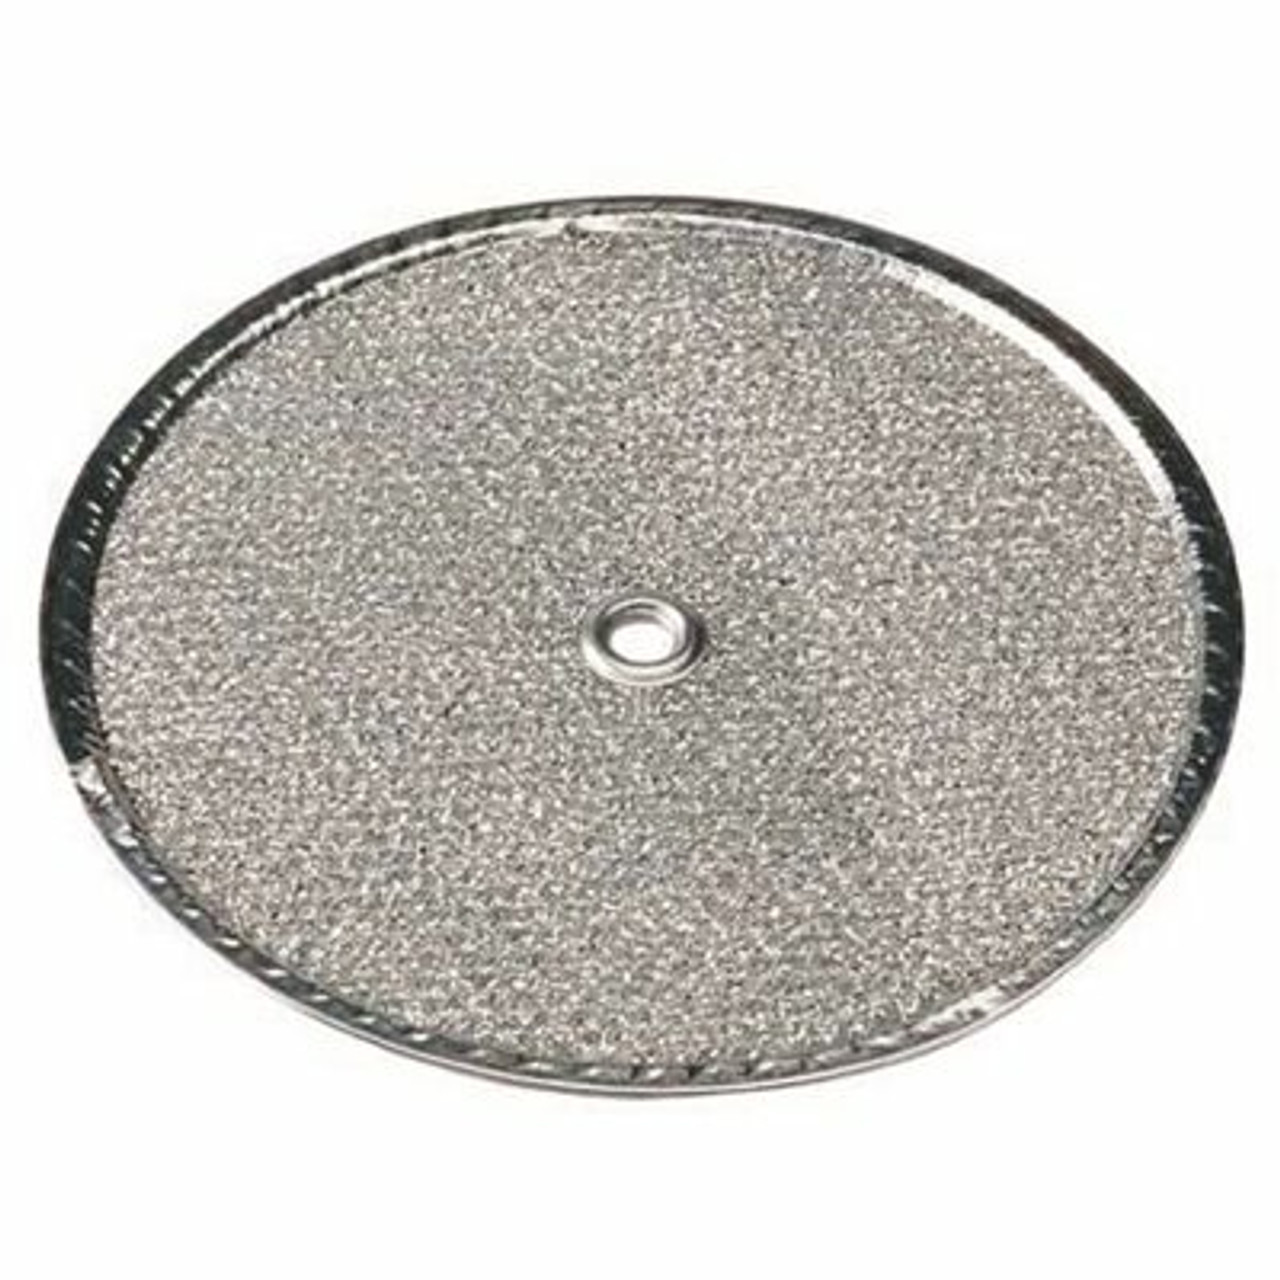 All-Filters Aluminum Round Range Hood Filter 9-1/2 in. Rd X 3/32 in. With Center Hole